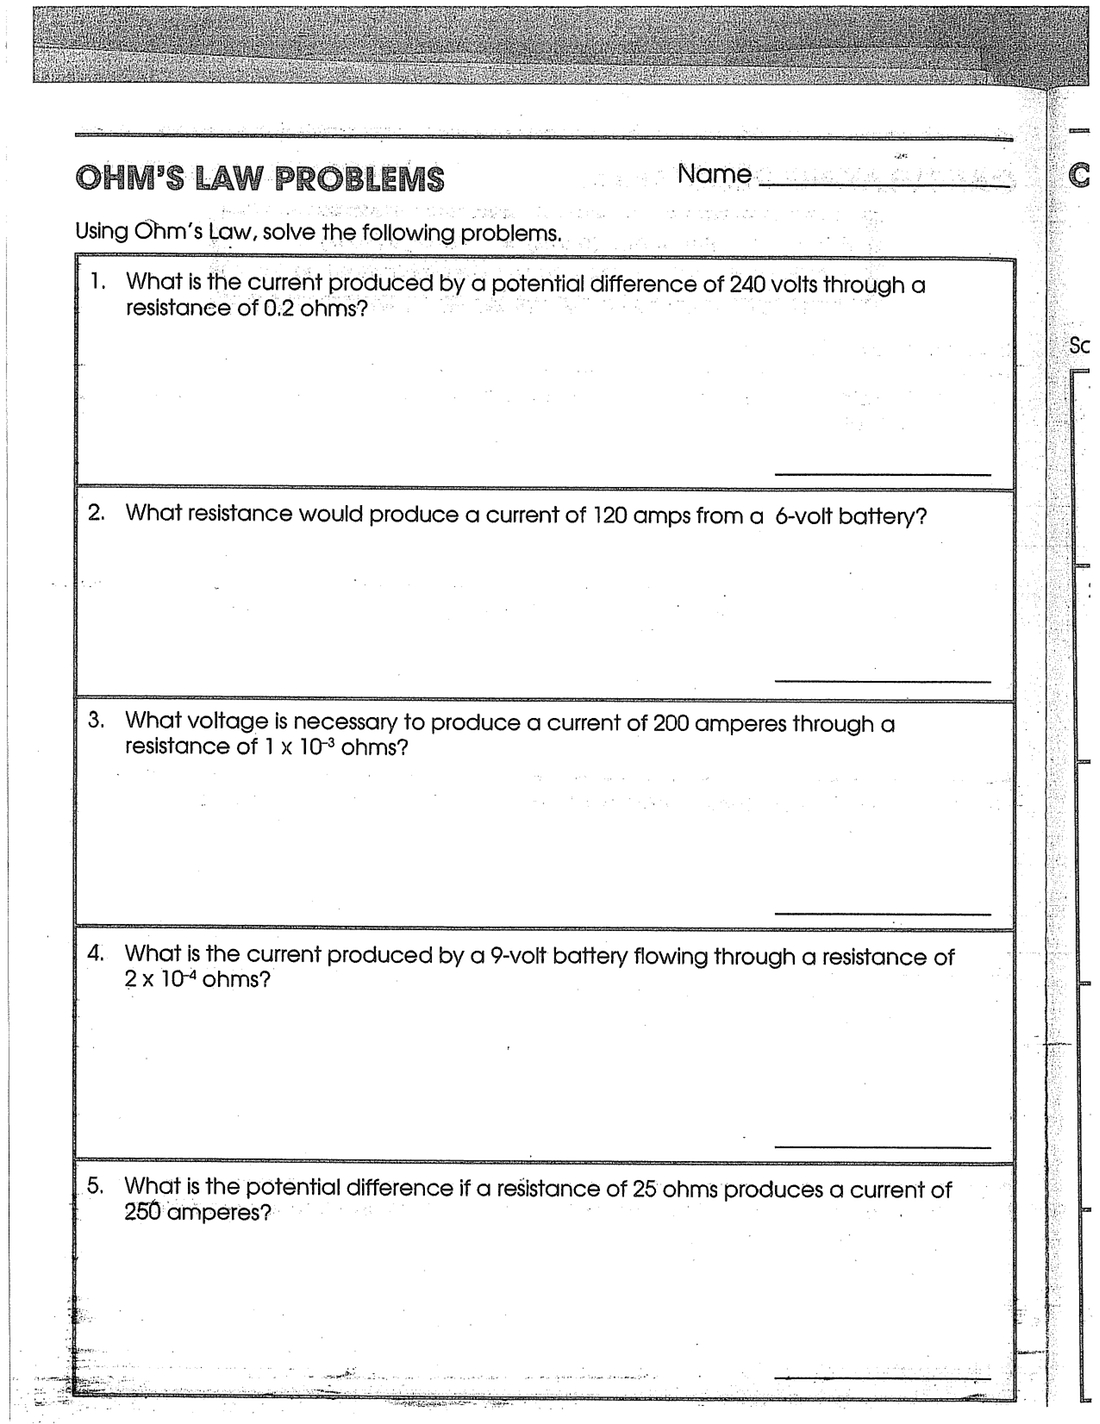 Series Parallel Circuit Problems Worksheet  Electrical Wiring Diagram Pertaining To Physical Science If8767 Worksheet Answers